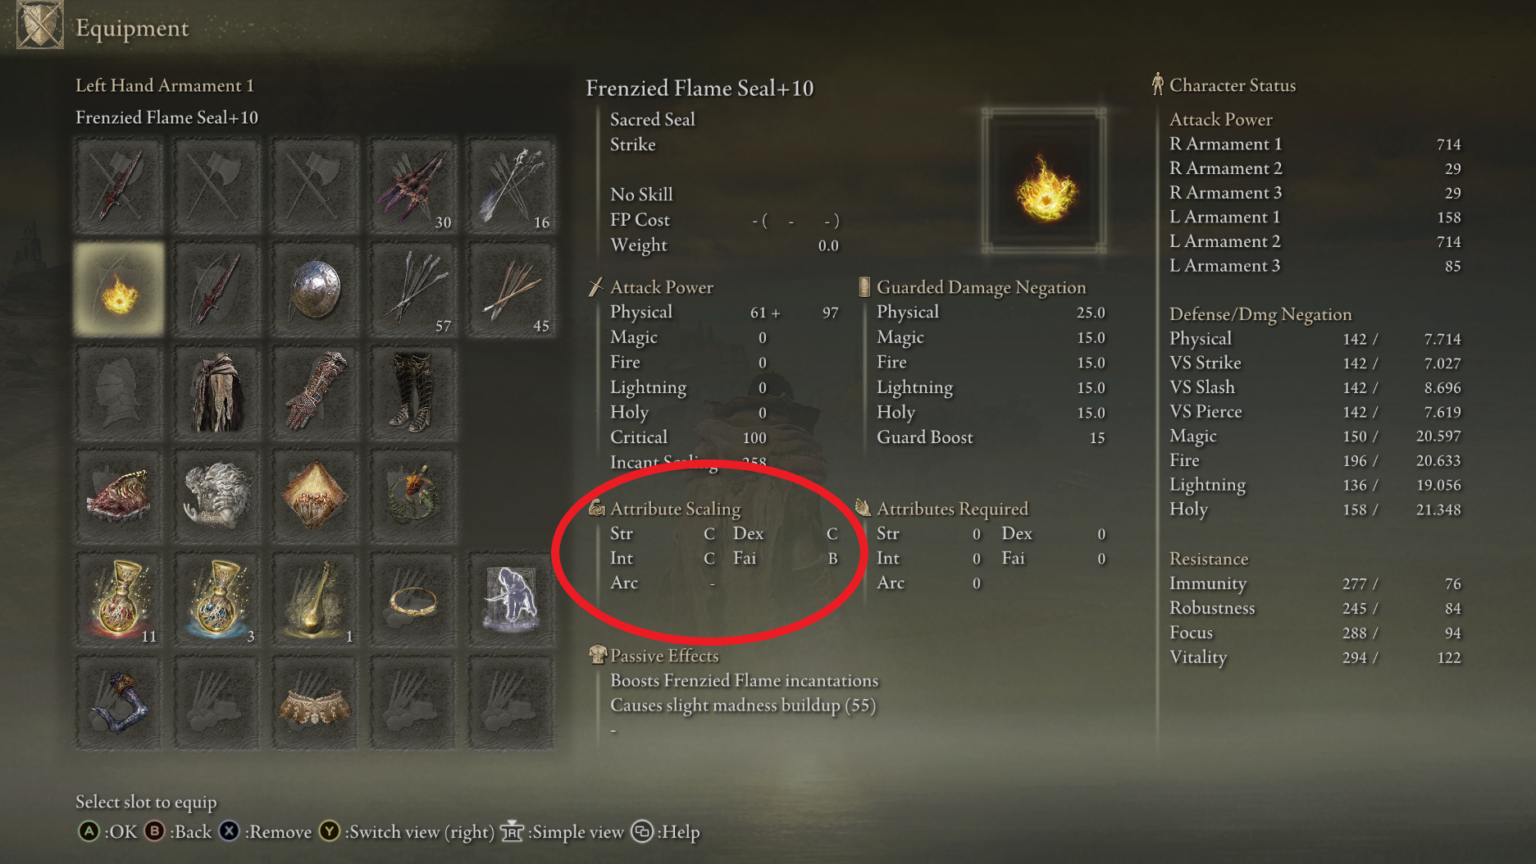 How to interpret weapon stats and character status in Elden Ring Dot